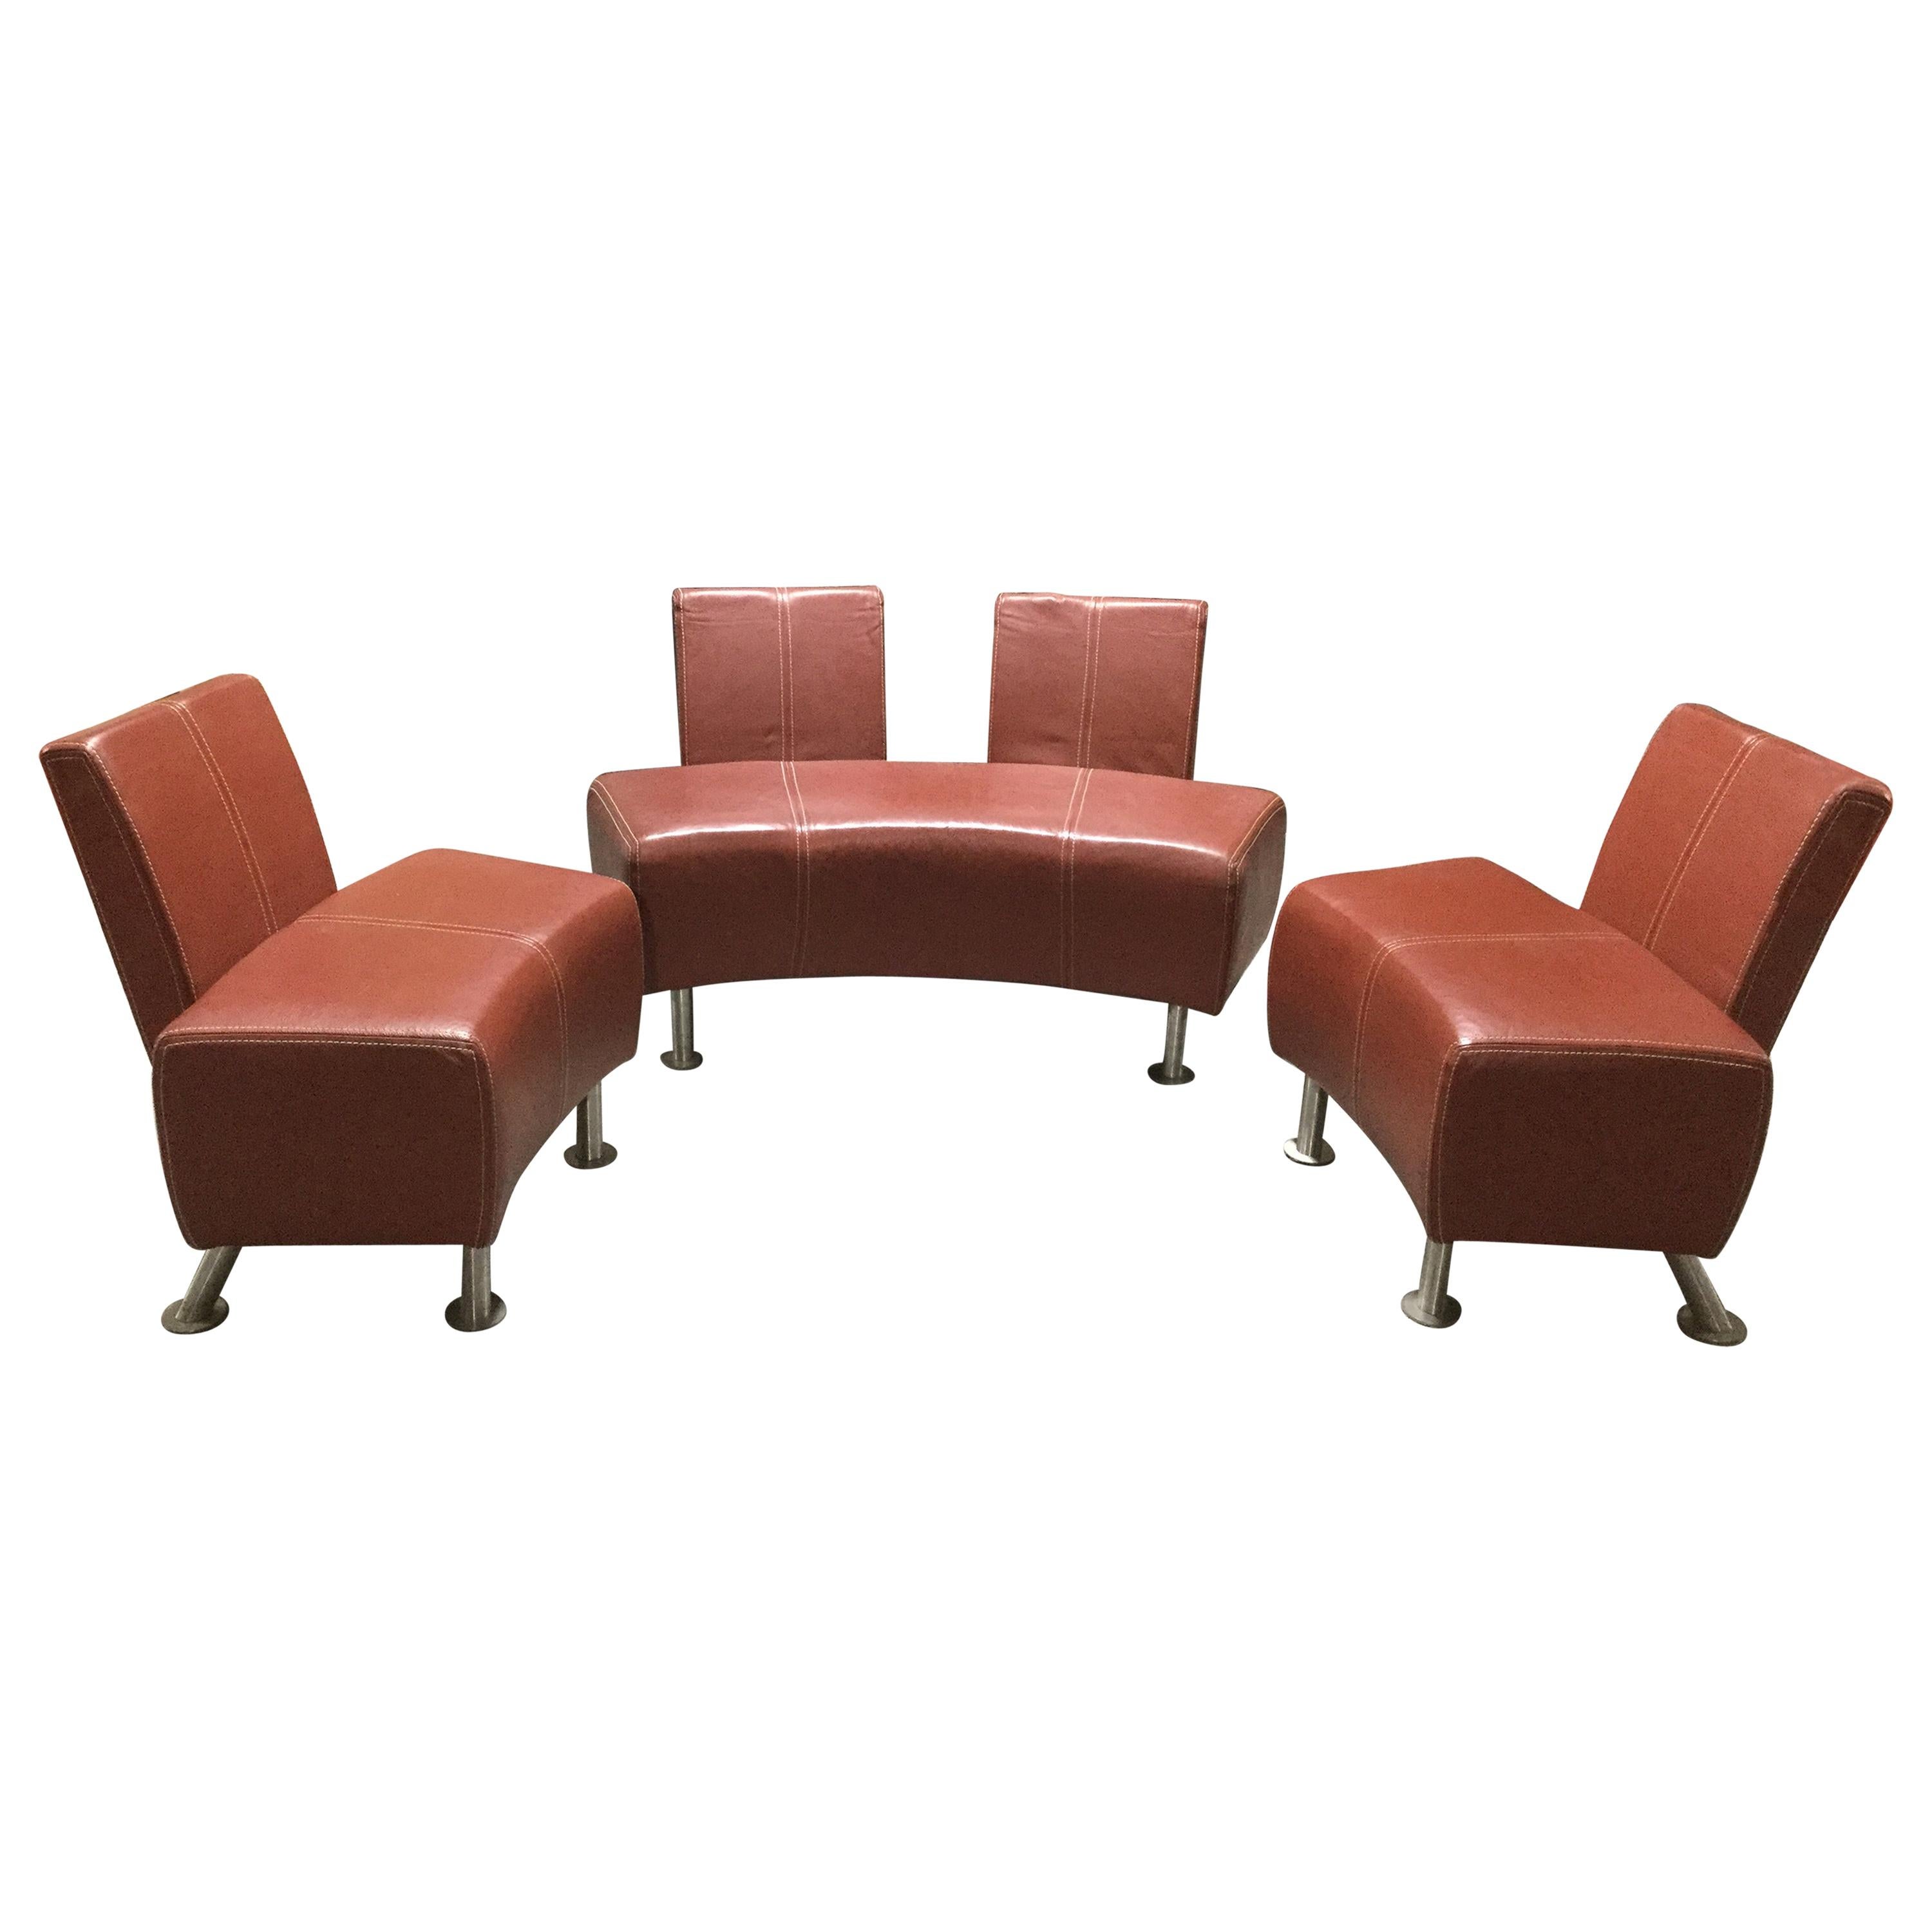 3 Piece Italian Industrial Leather and Chrome Salon For Sale